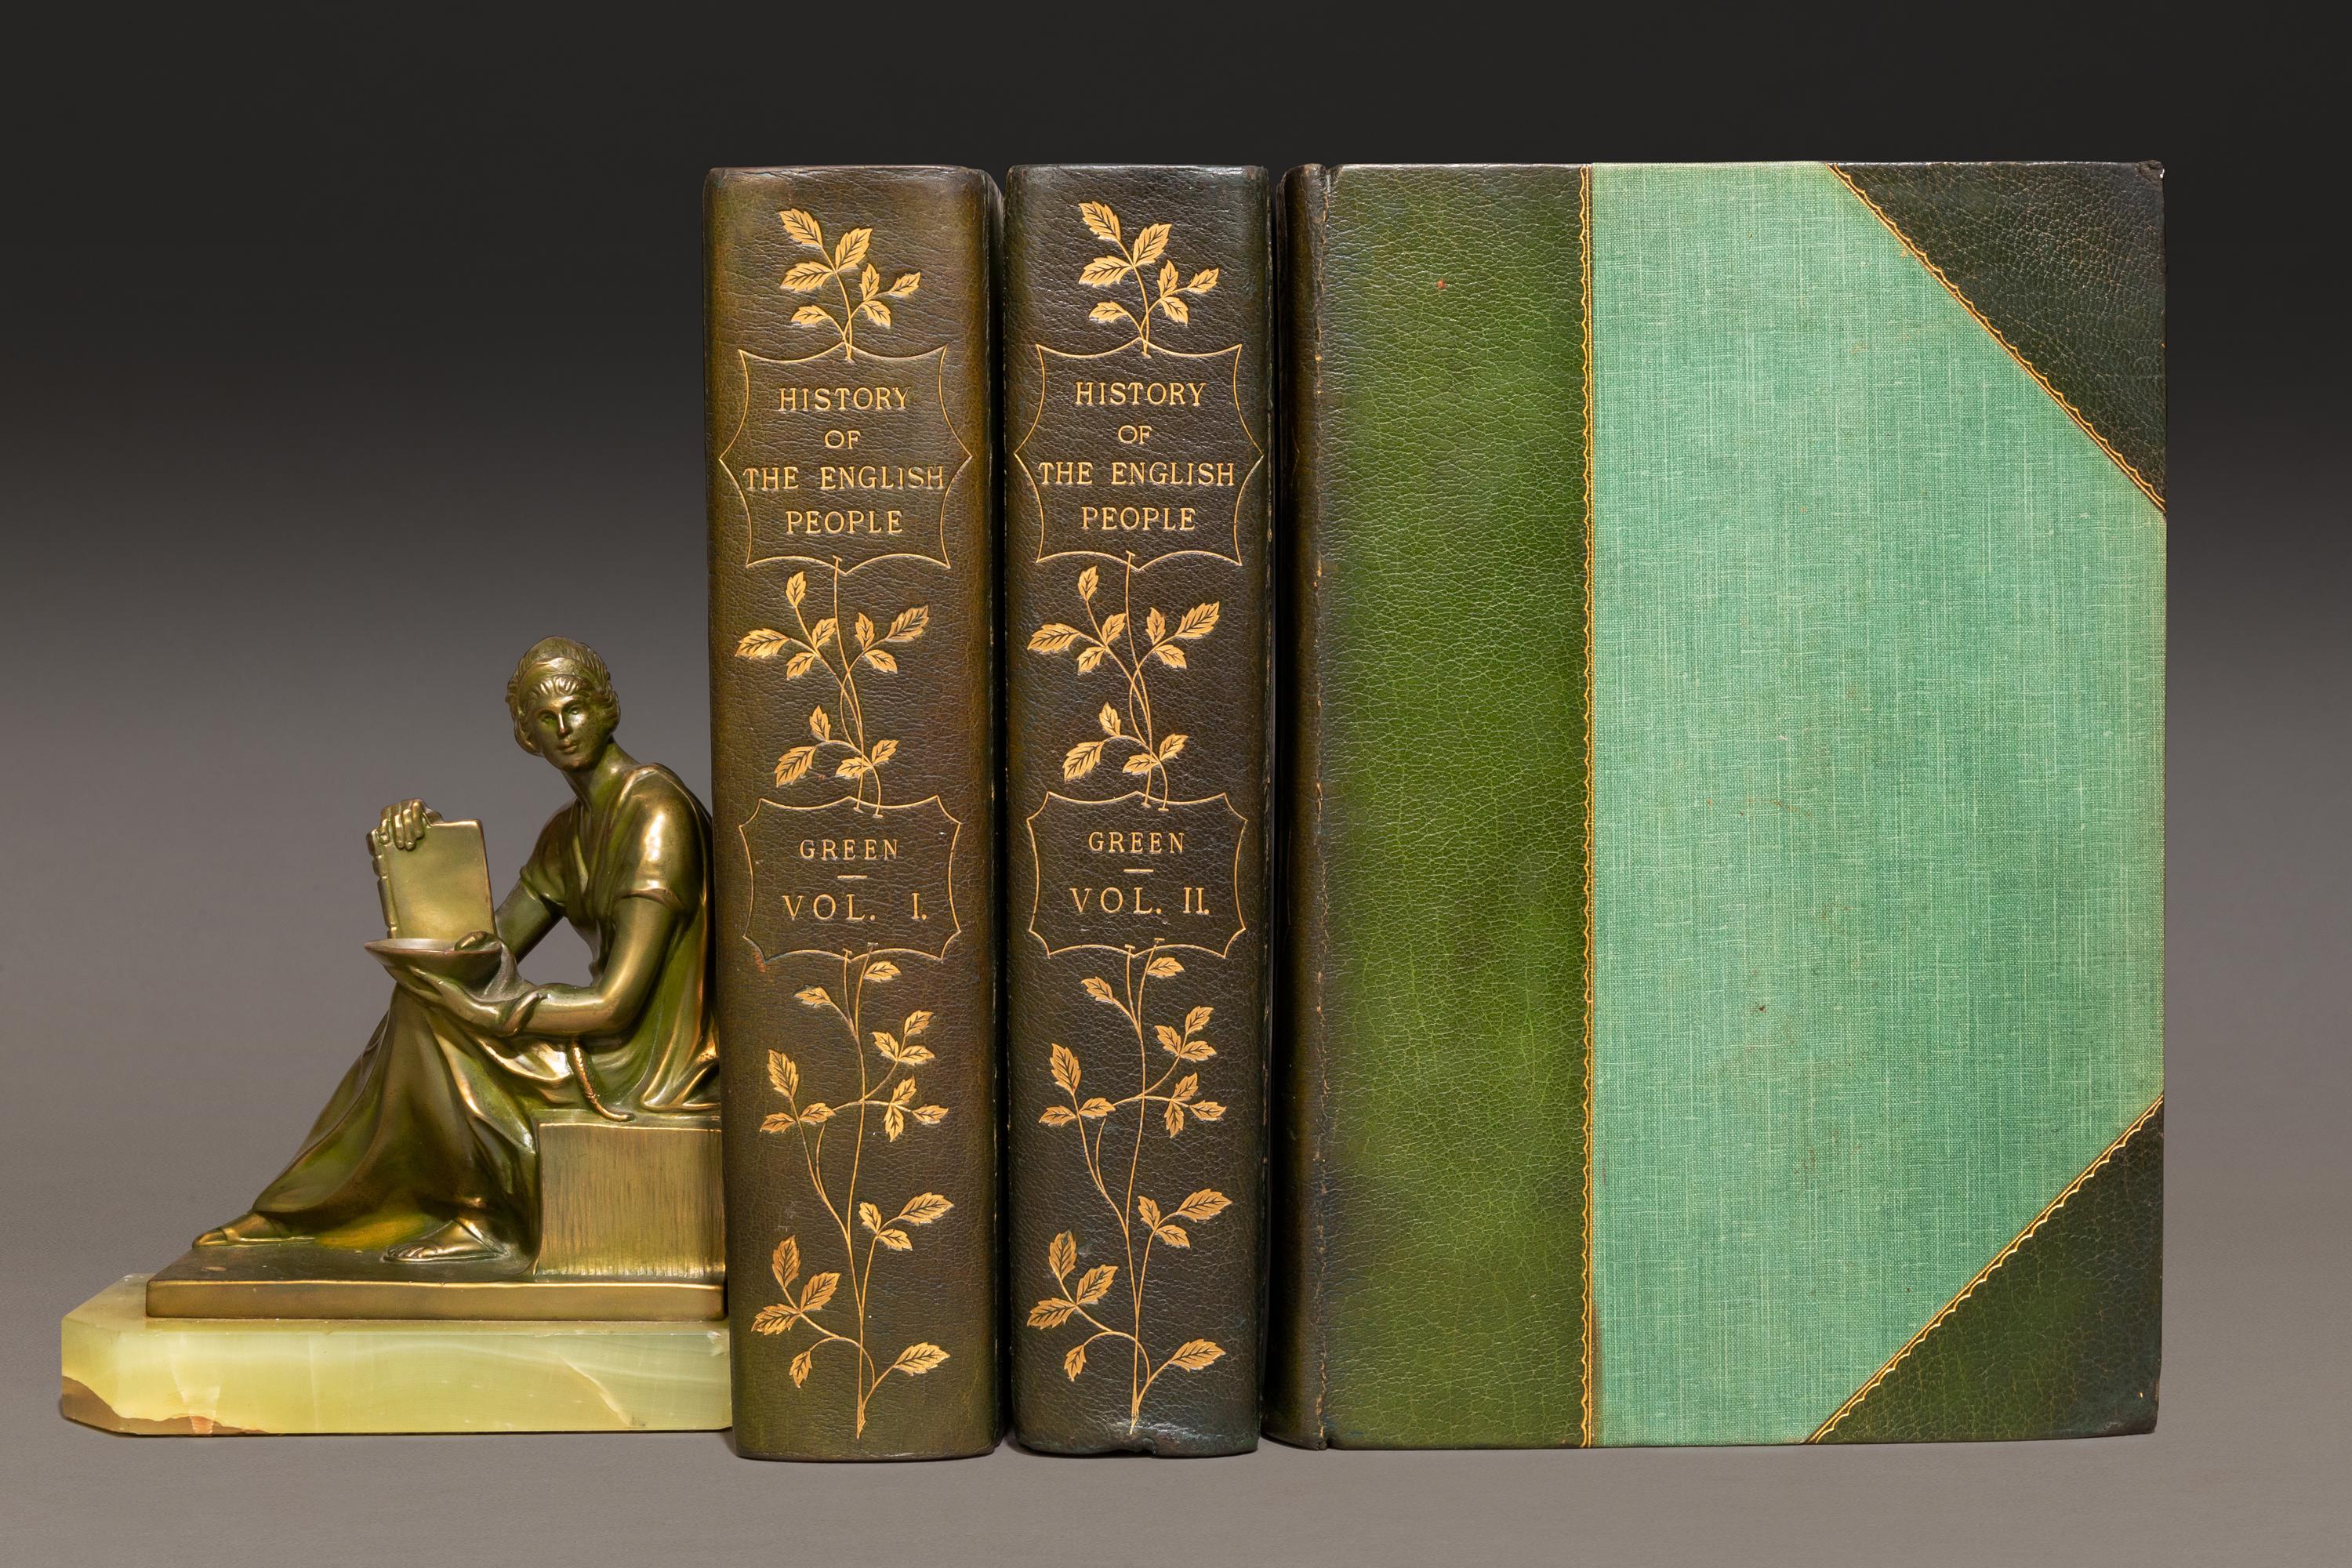 3 Volumes. J.R. Green. A Short History Of The English People. Illustrated. Bound in 3/4 green morocco
by Sotheran's, linen boards, top edges gilt, ornate floral gilt on spines, marbled endpapers. Published:
London: MacMillan & Co. 1898. Handsome